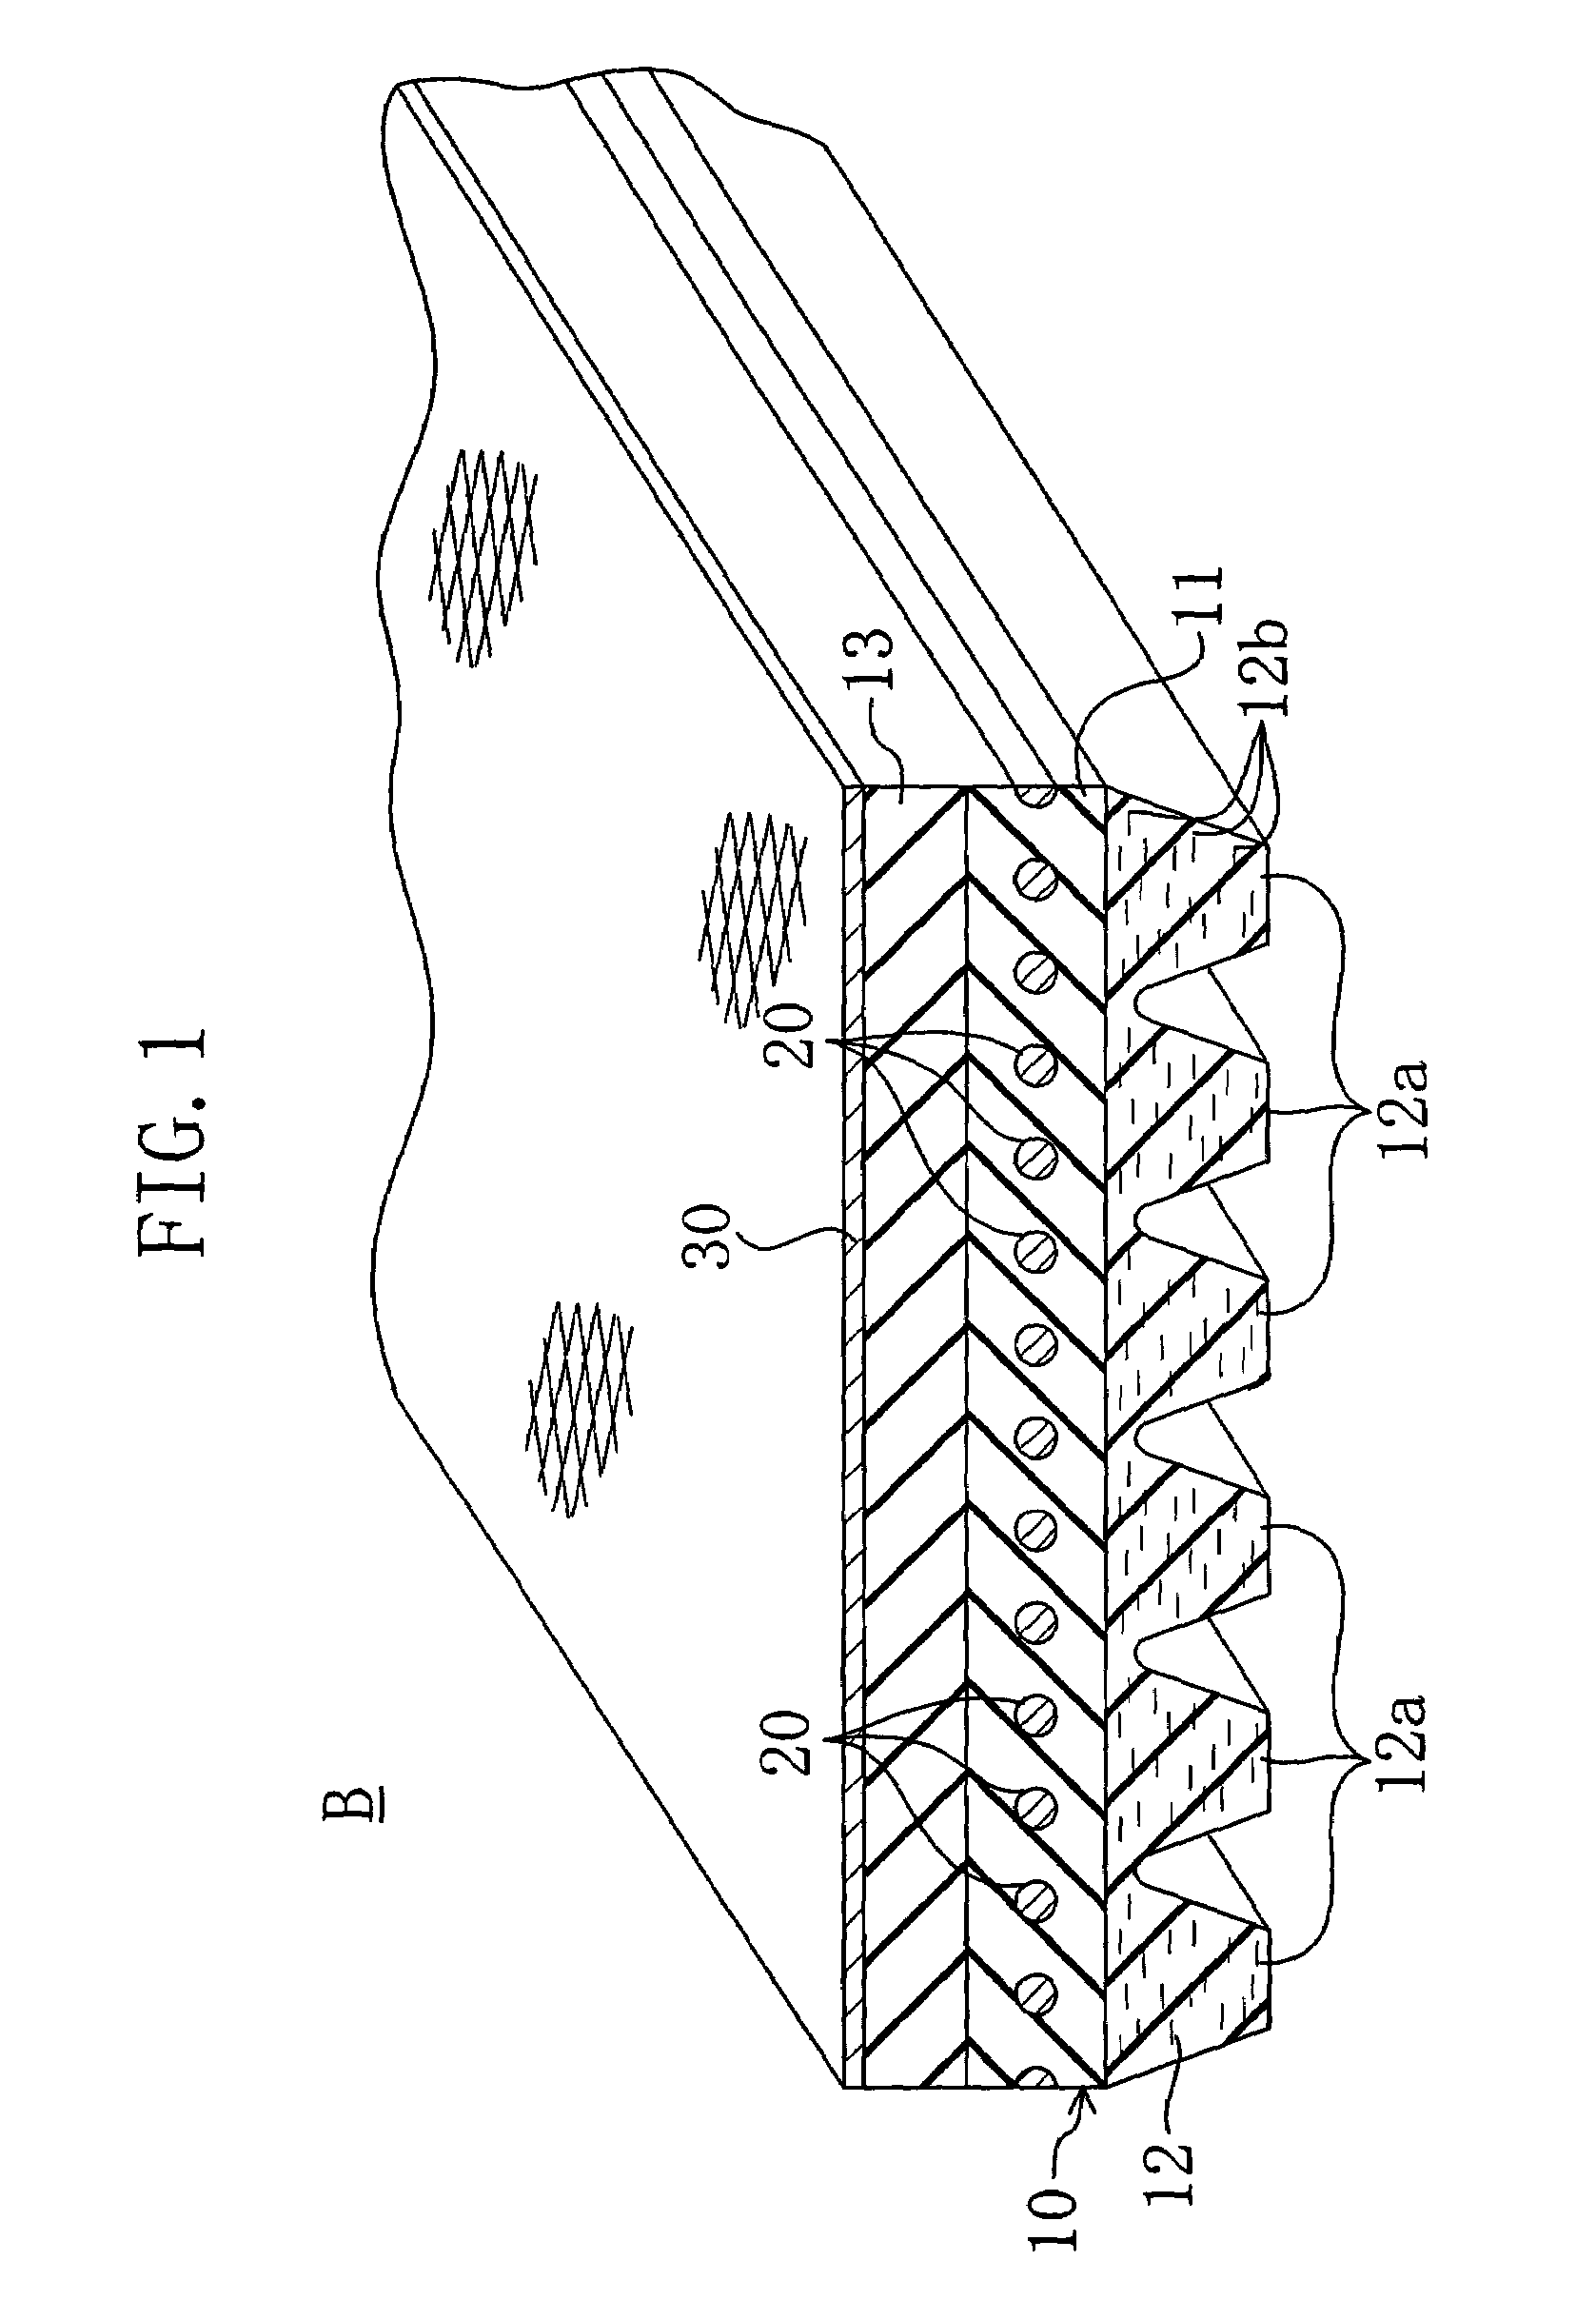 Power transmission belt and belt drive system with the same